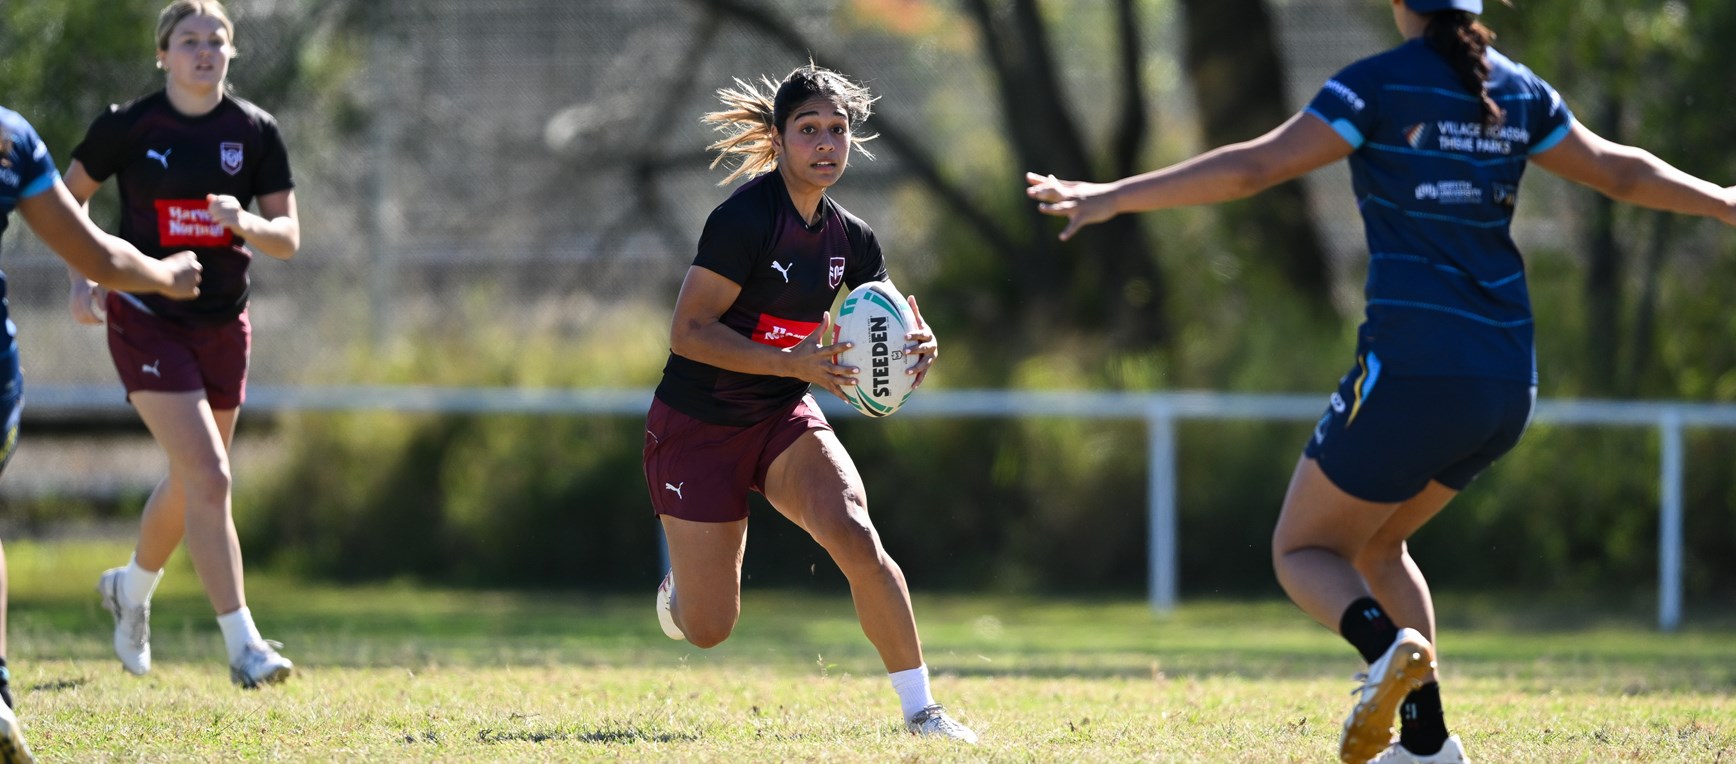 In pictures: Queensland Under 19 women's opposed session